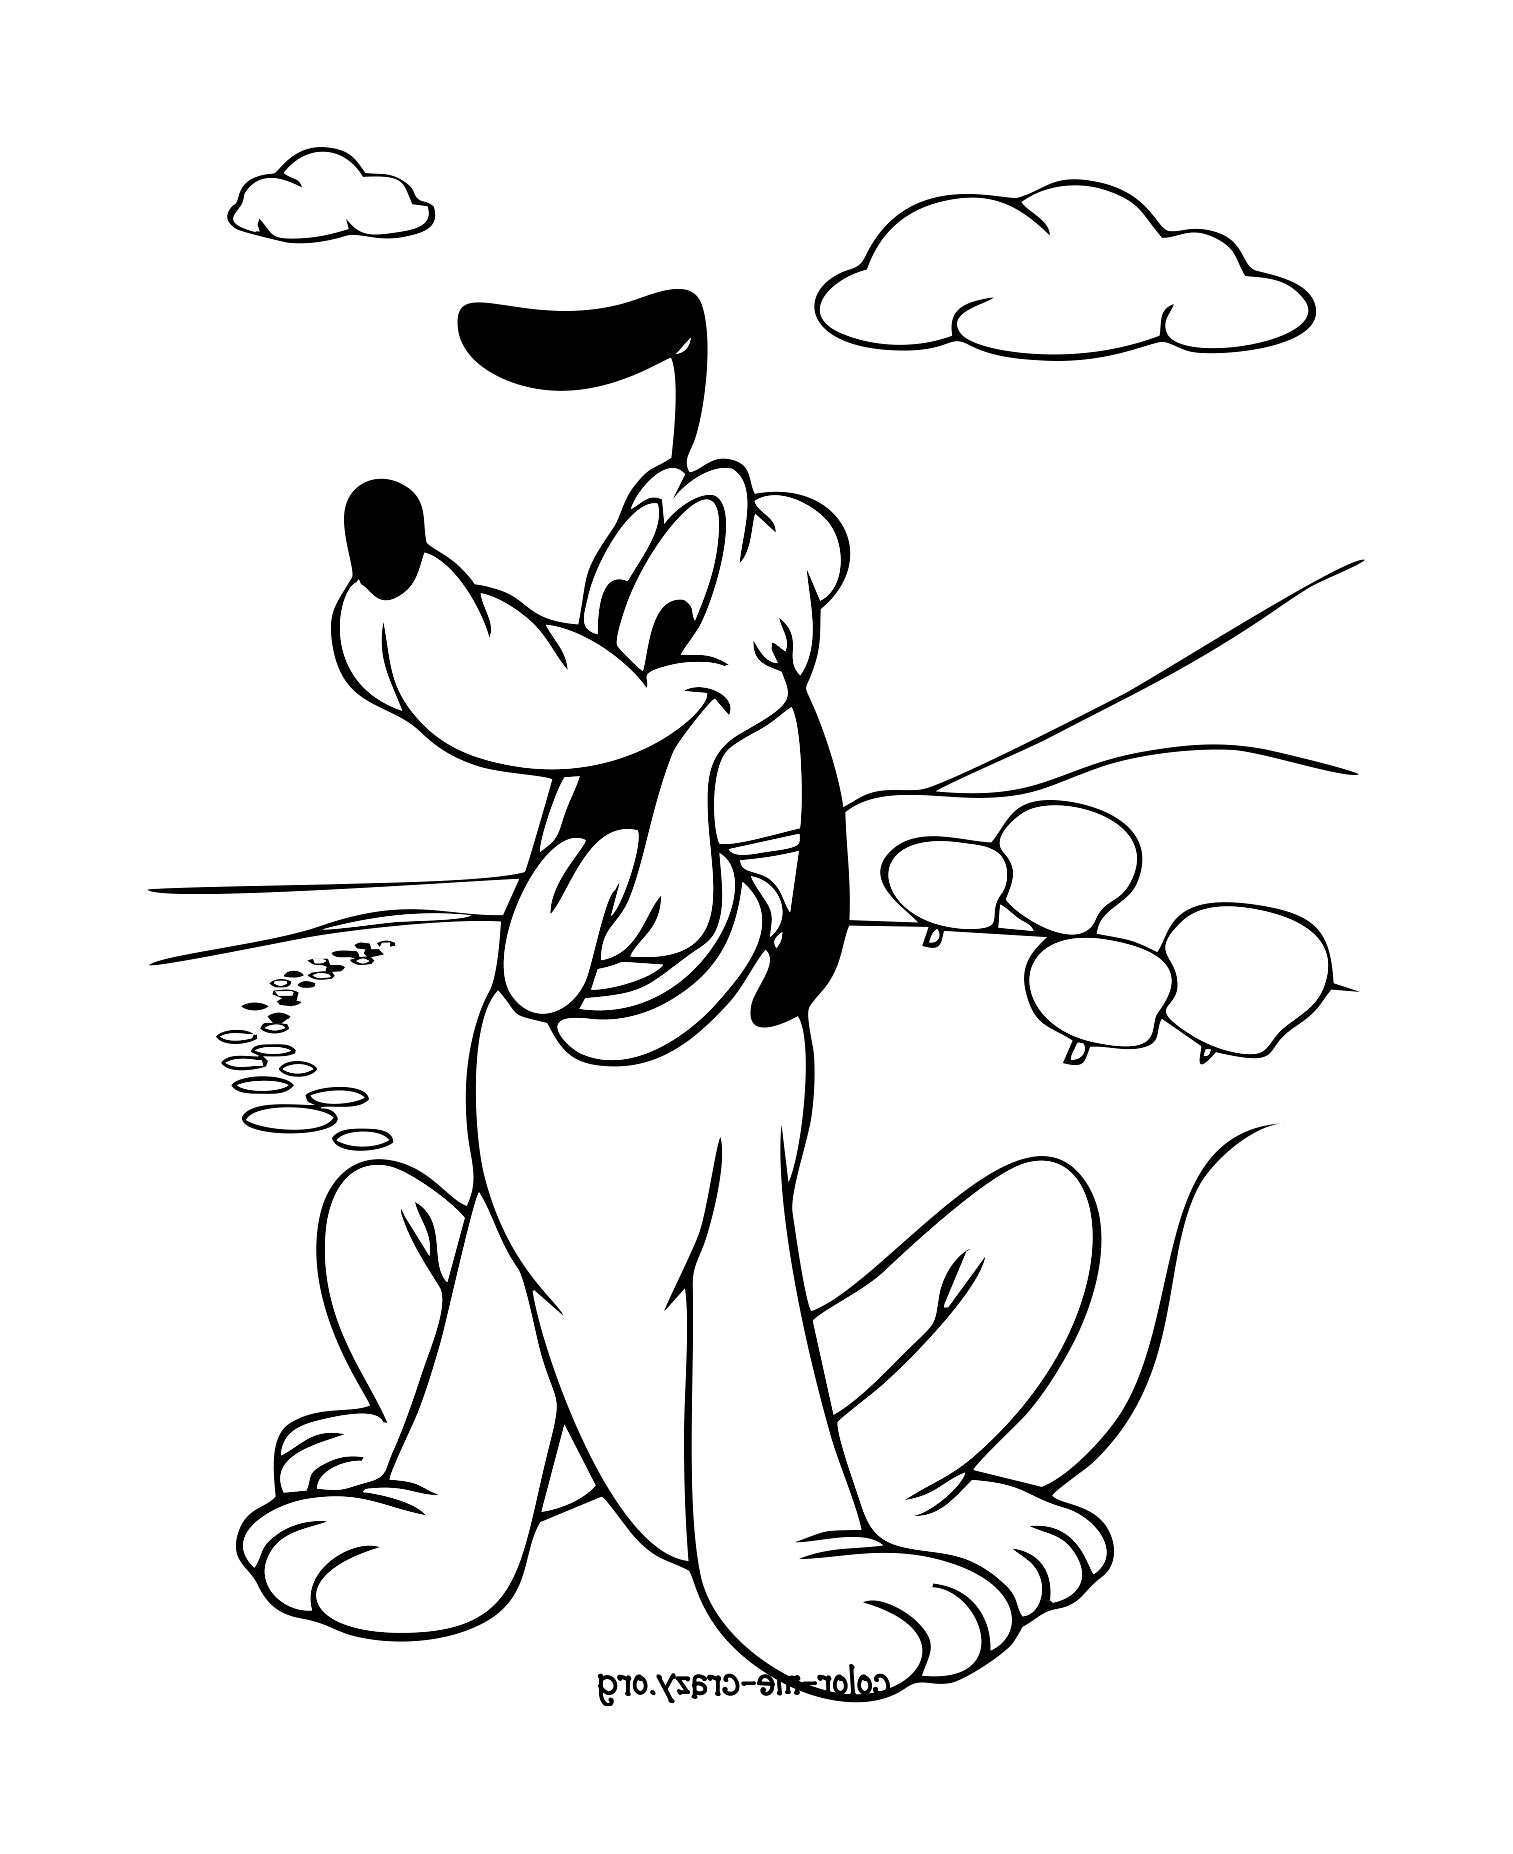 Free coloring pages of Pluto - Pluto Kids Coloring Pages